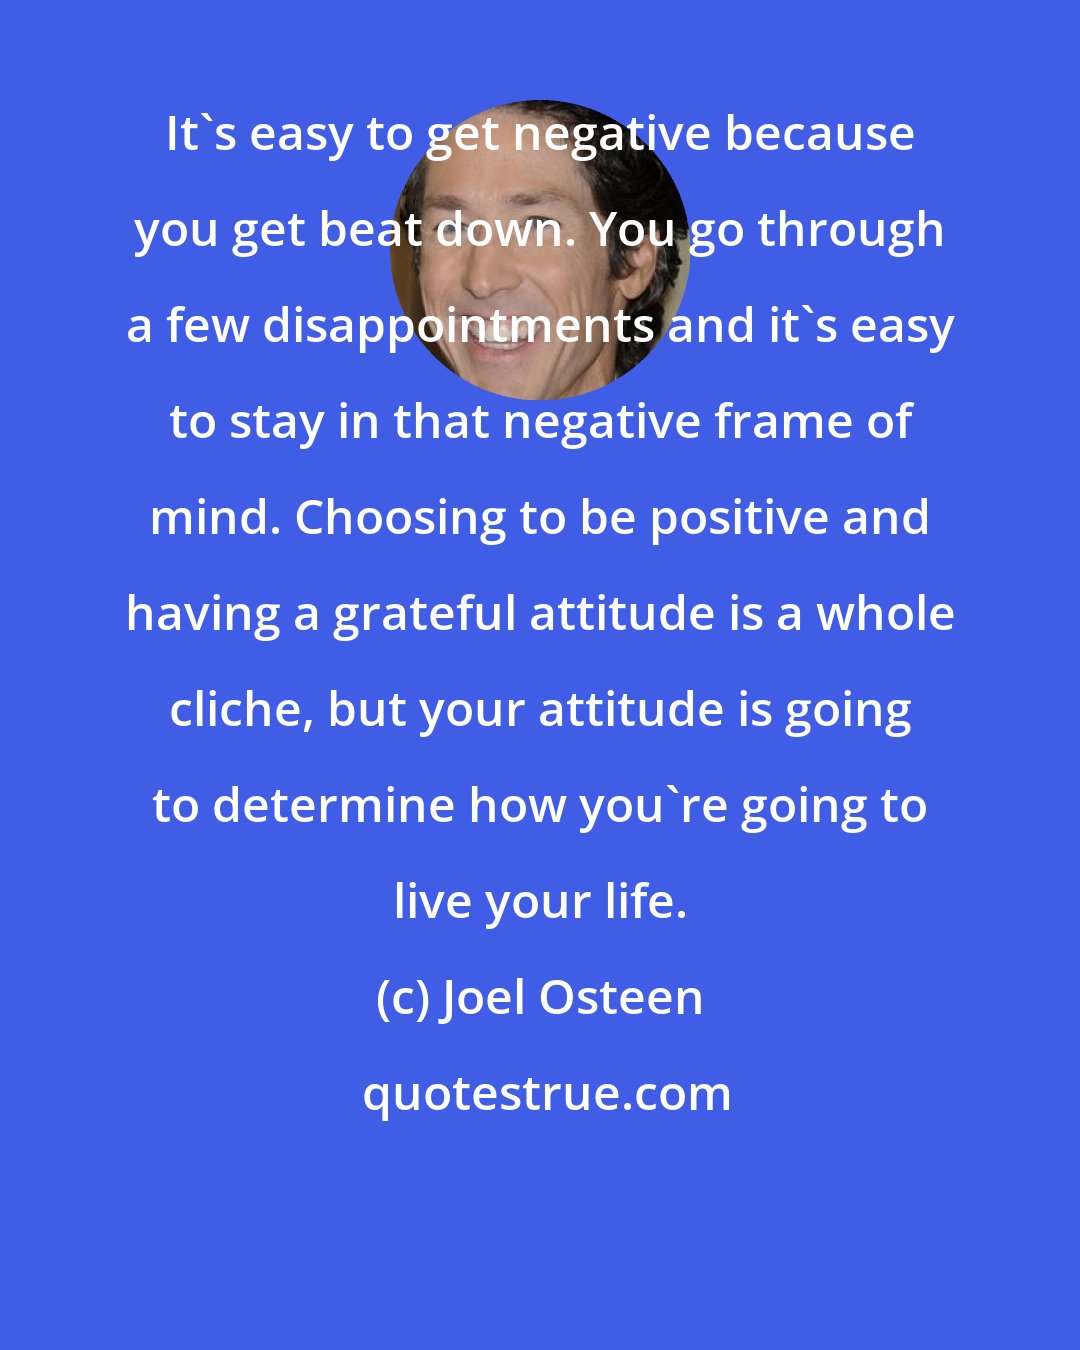 Joel Osteen: It's easy to get negative because you get beat down. You go through a few disappointments and it's easy to stay in that negative frame of mind. Choosing to be positive and having a grateful attitude is a whole cliche, but your attitude is going to determine how you're going to live your life.